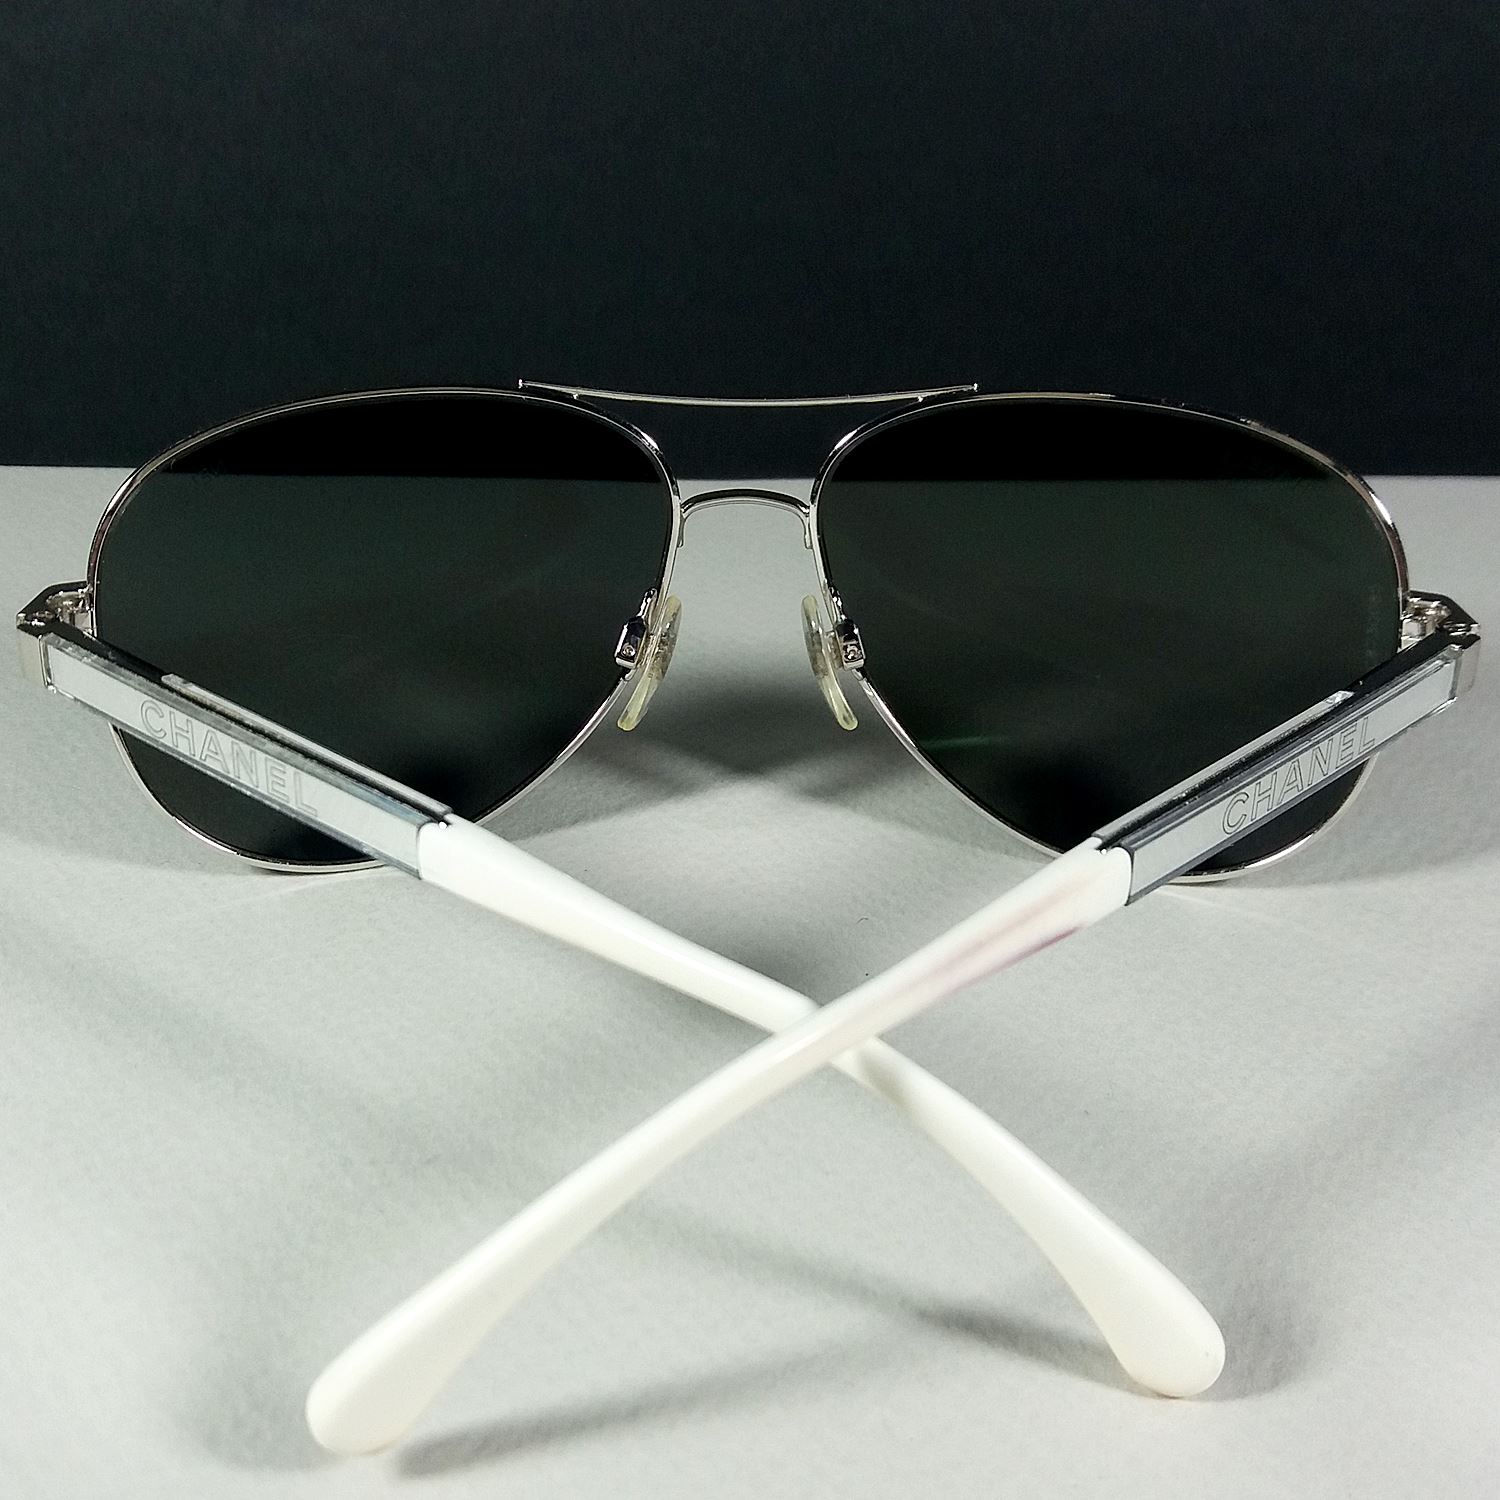 CHANEL Pilot Sunglasses 4189-T-Q c.124/S2 silver navy mirror lens with case